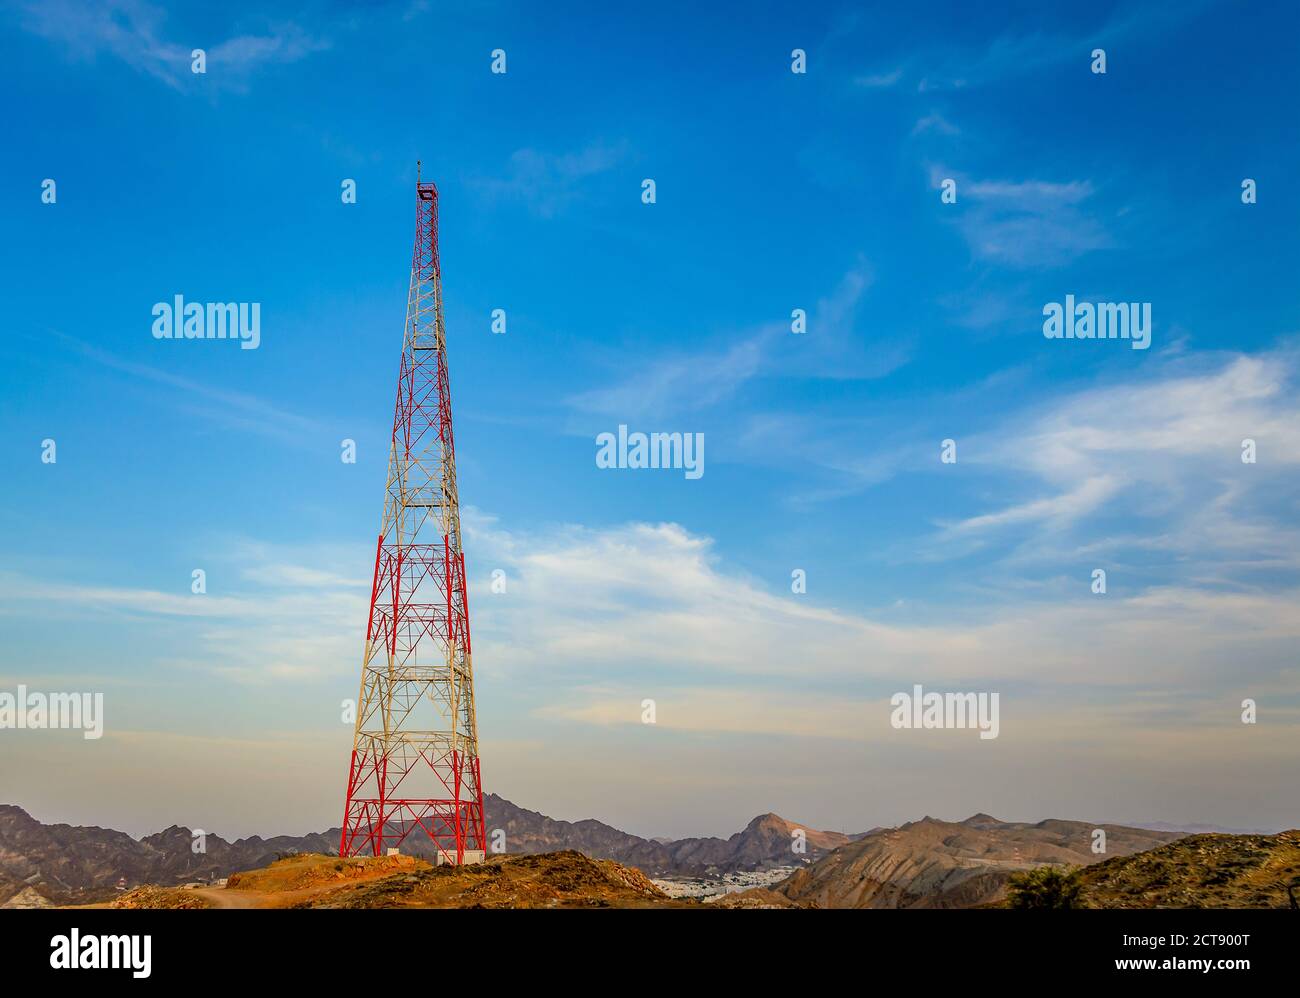 Mobile Tower on top of a mountain with a clear blue sky in the background. From Muscat, Oman. Stock Photo